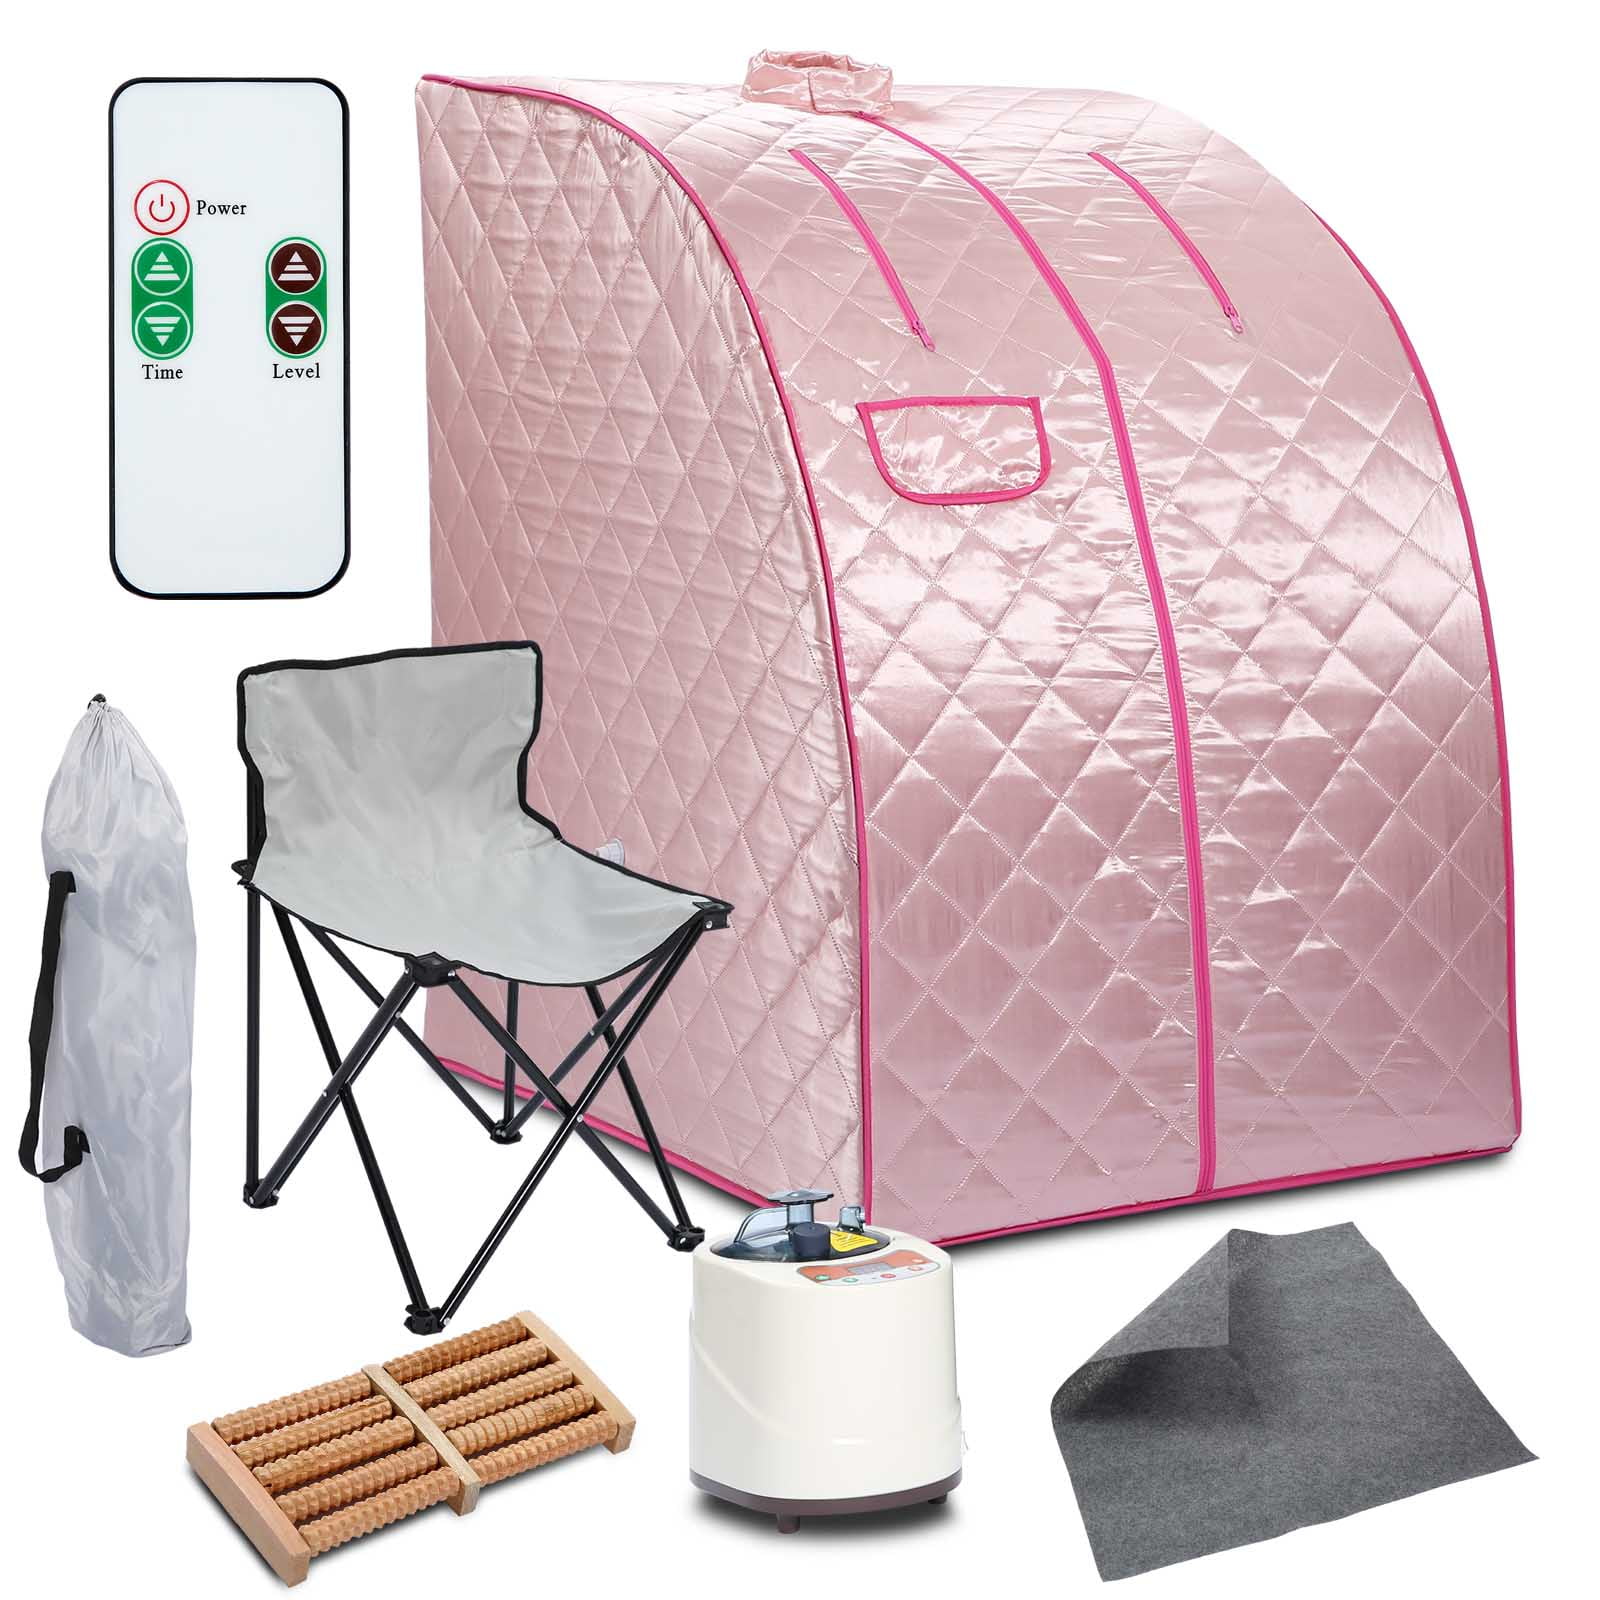 Details about   2L Foldable Steam Sauna Portable Indoor Home Spa Weight Loss Detox with EL 